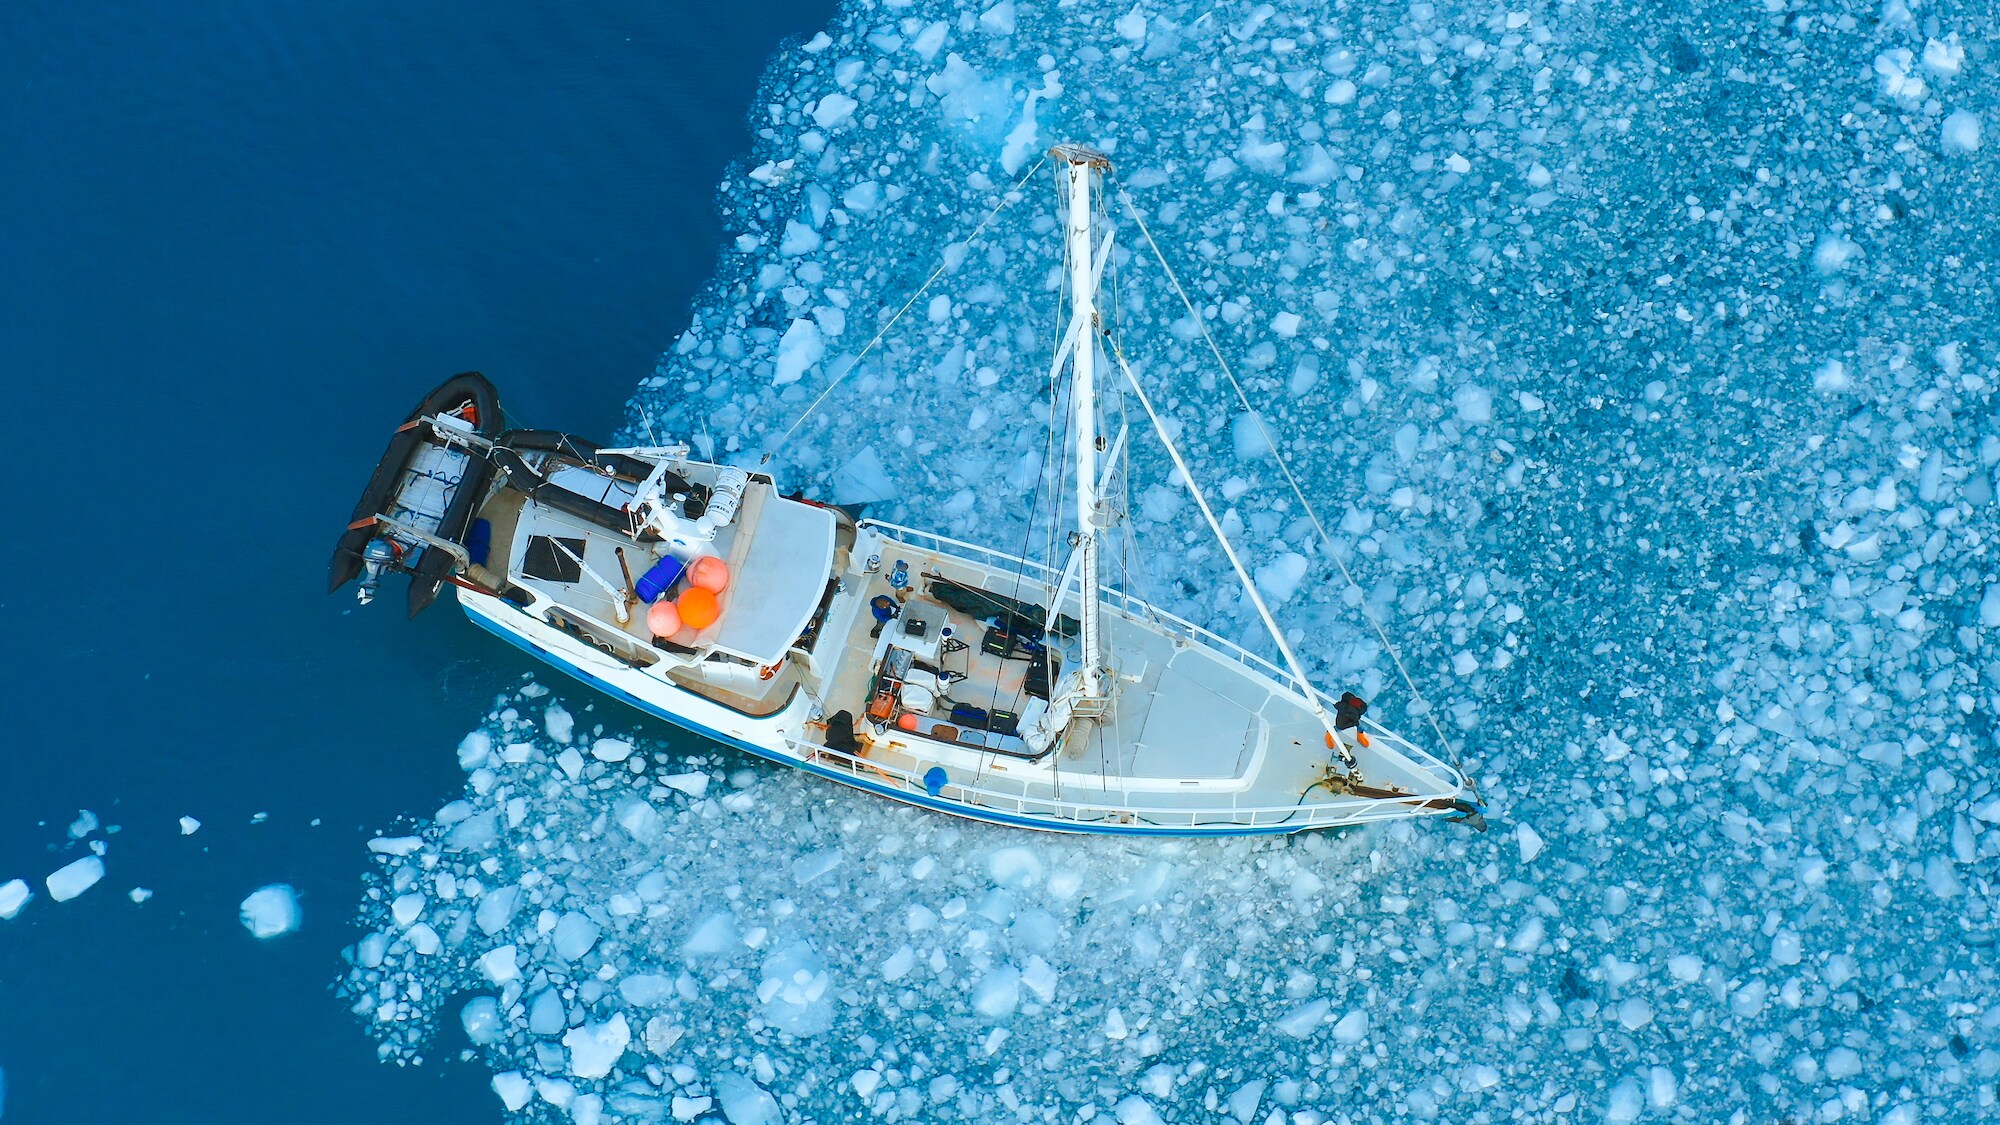 The crew's boat sailing through sheets of sea ice. (Credit: National Geographic/Bertie Gregory for Disney+)